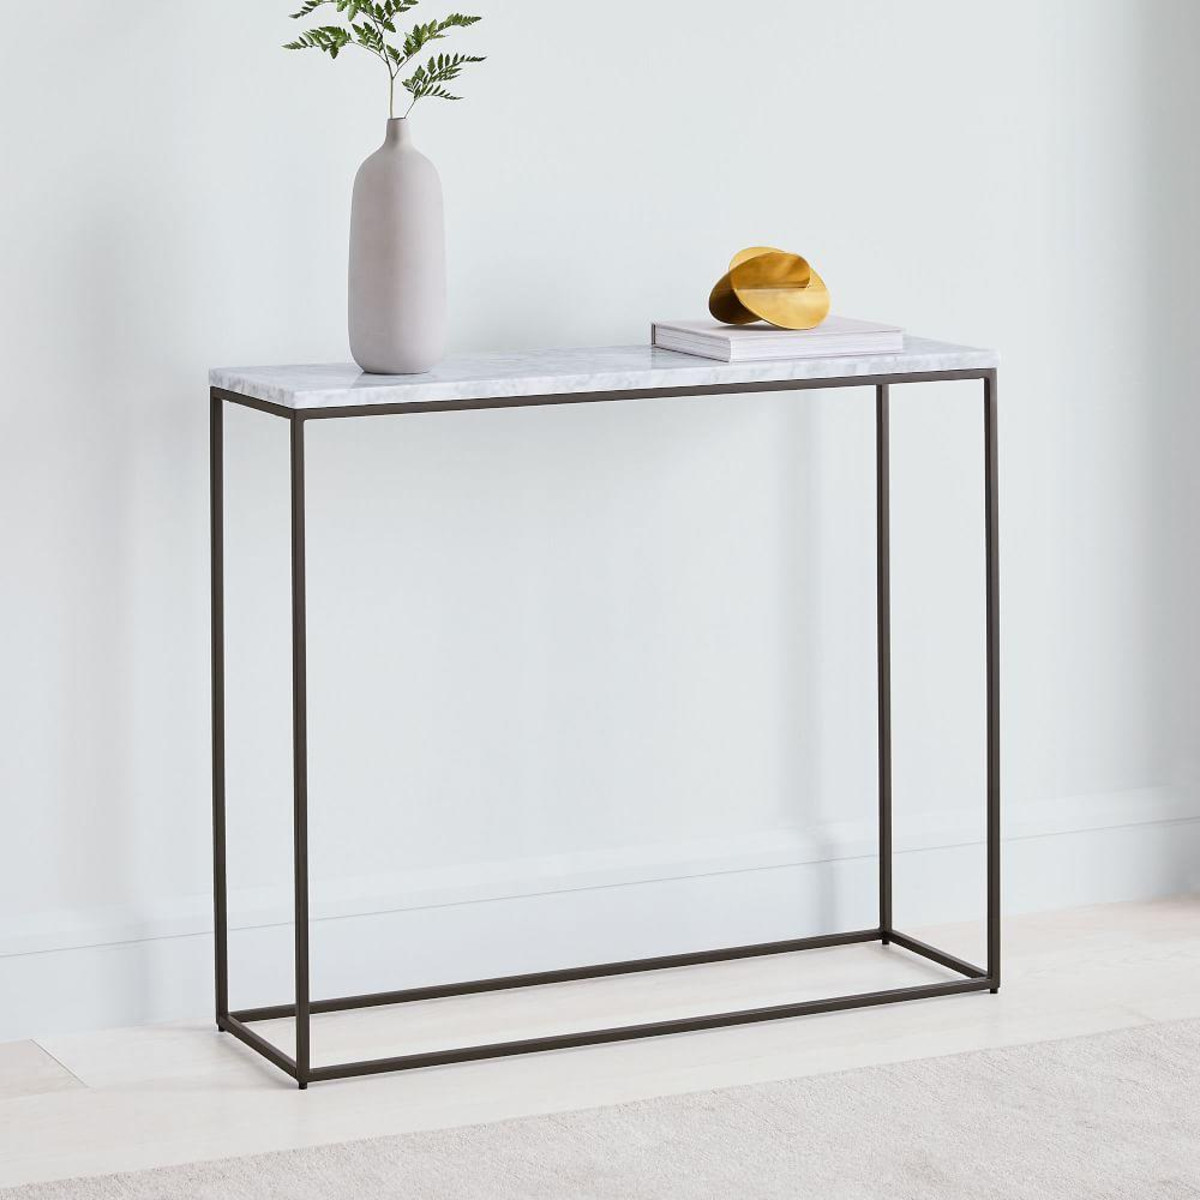 Streamline marble console table